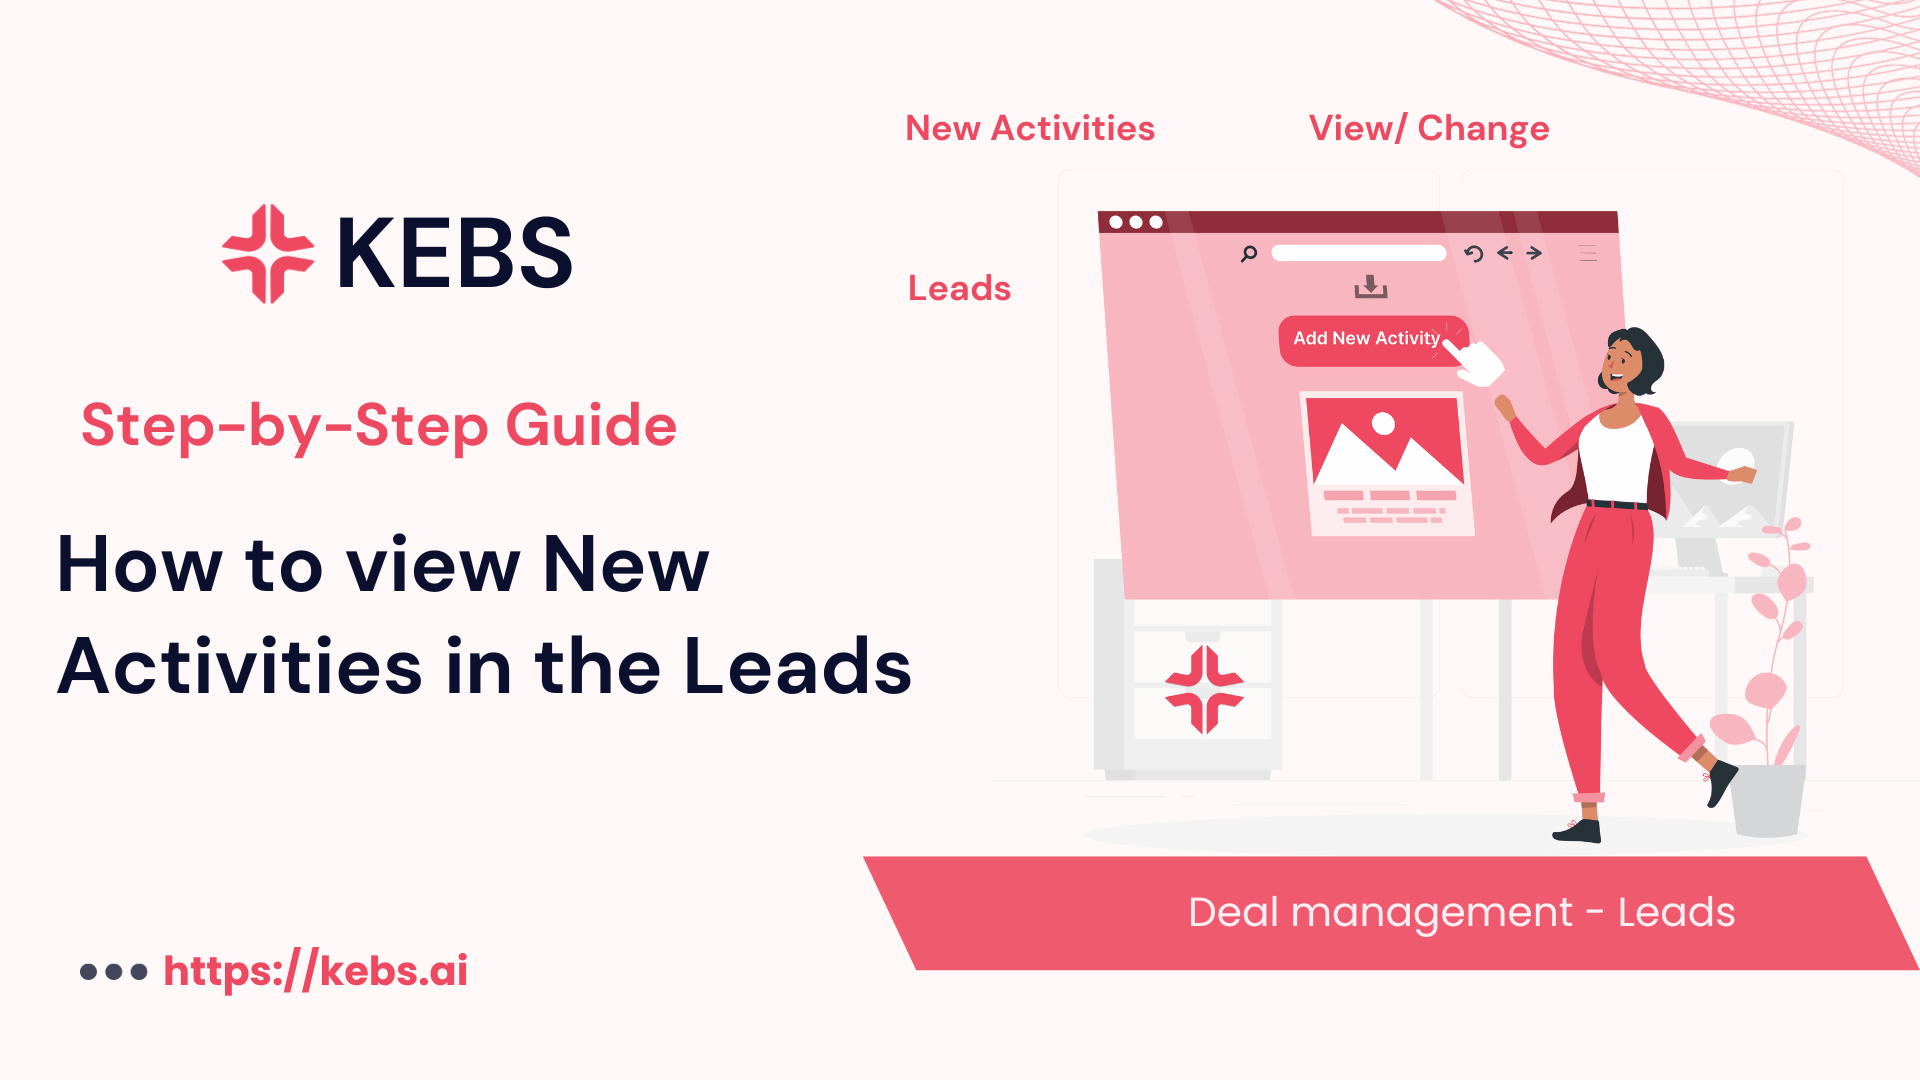 How to view New Activities in the Leads